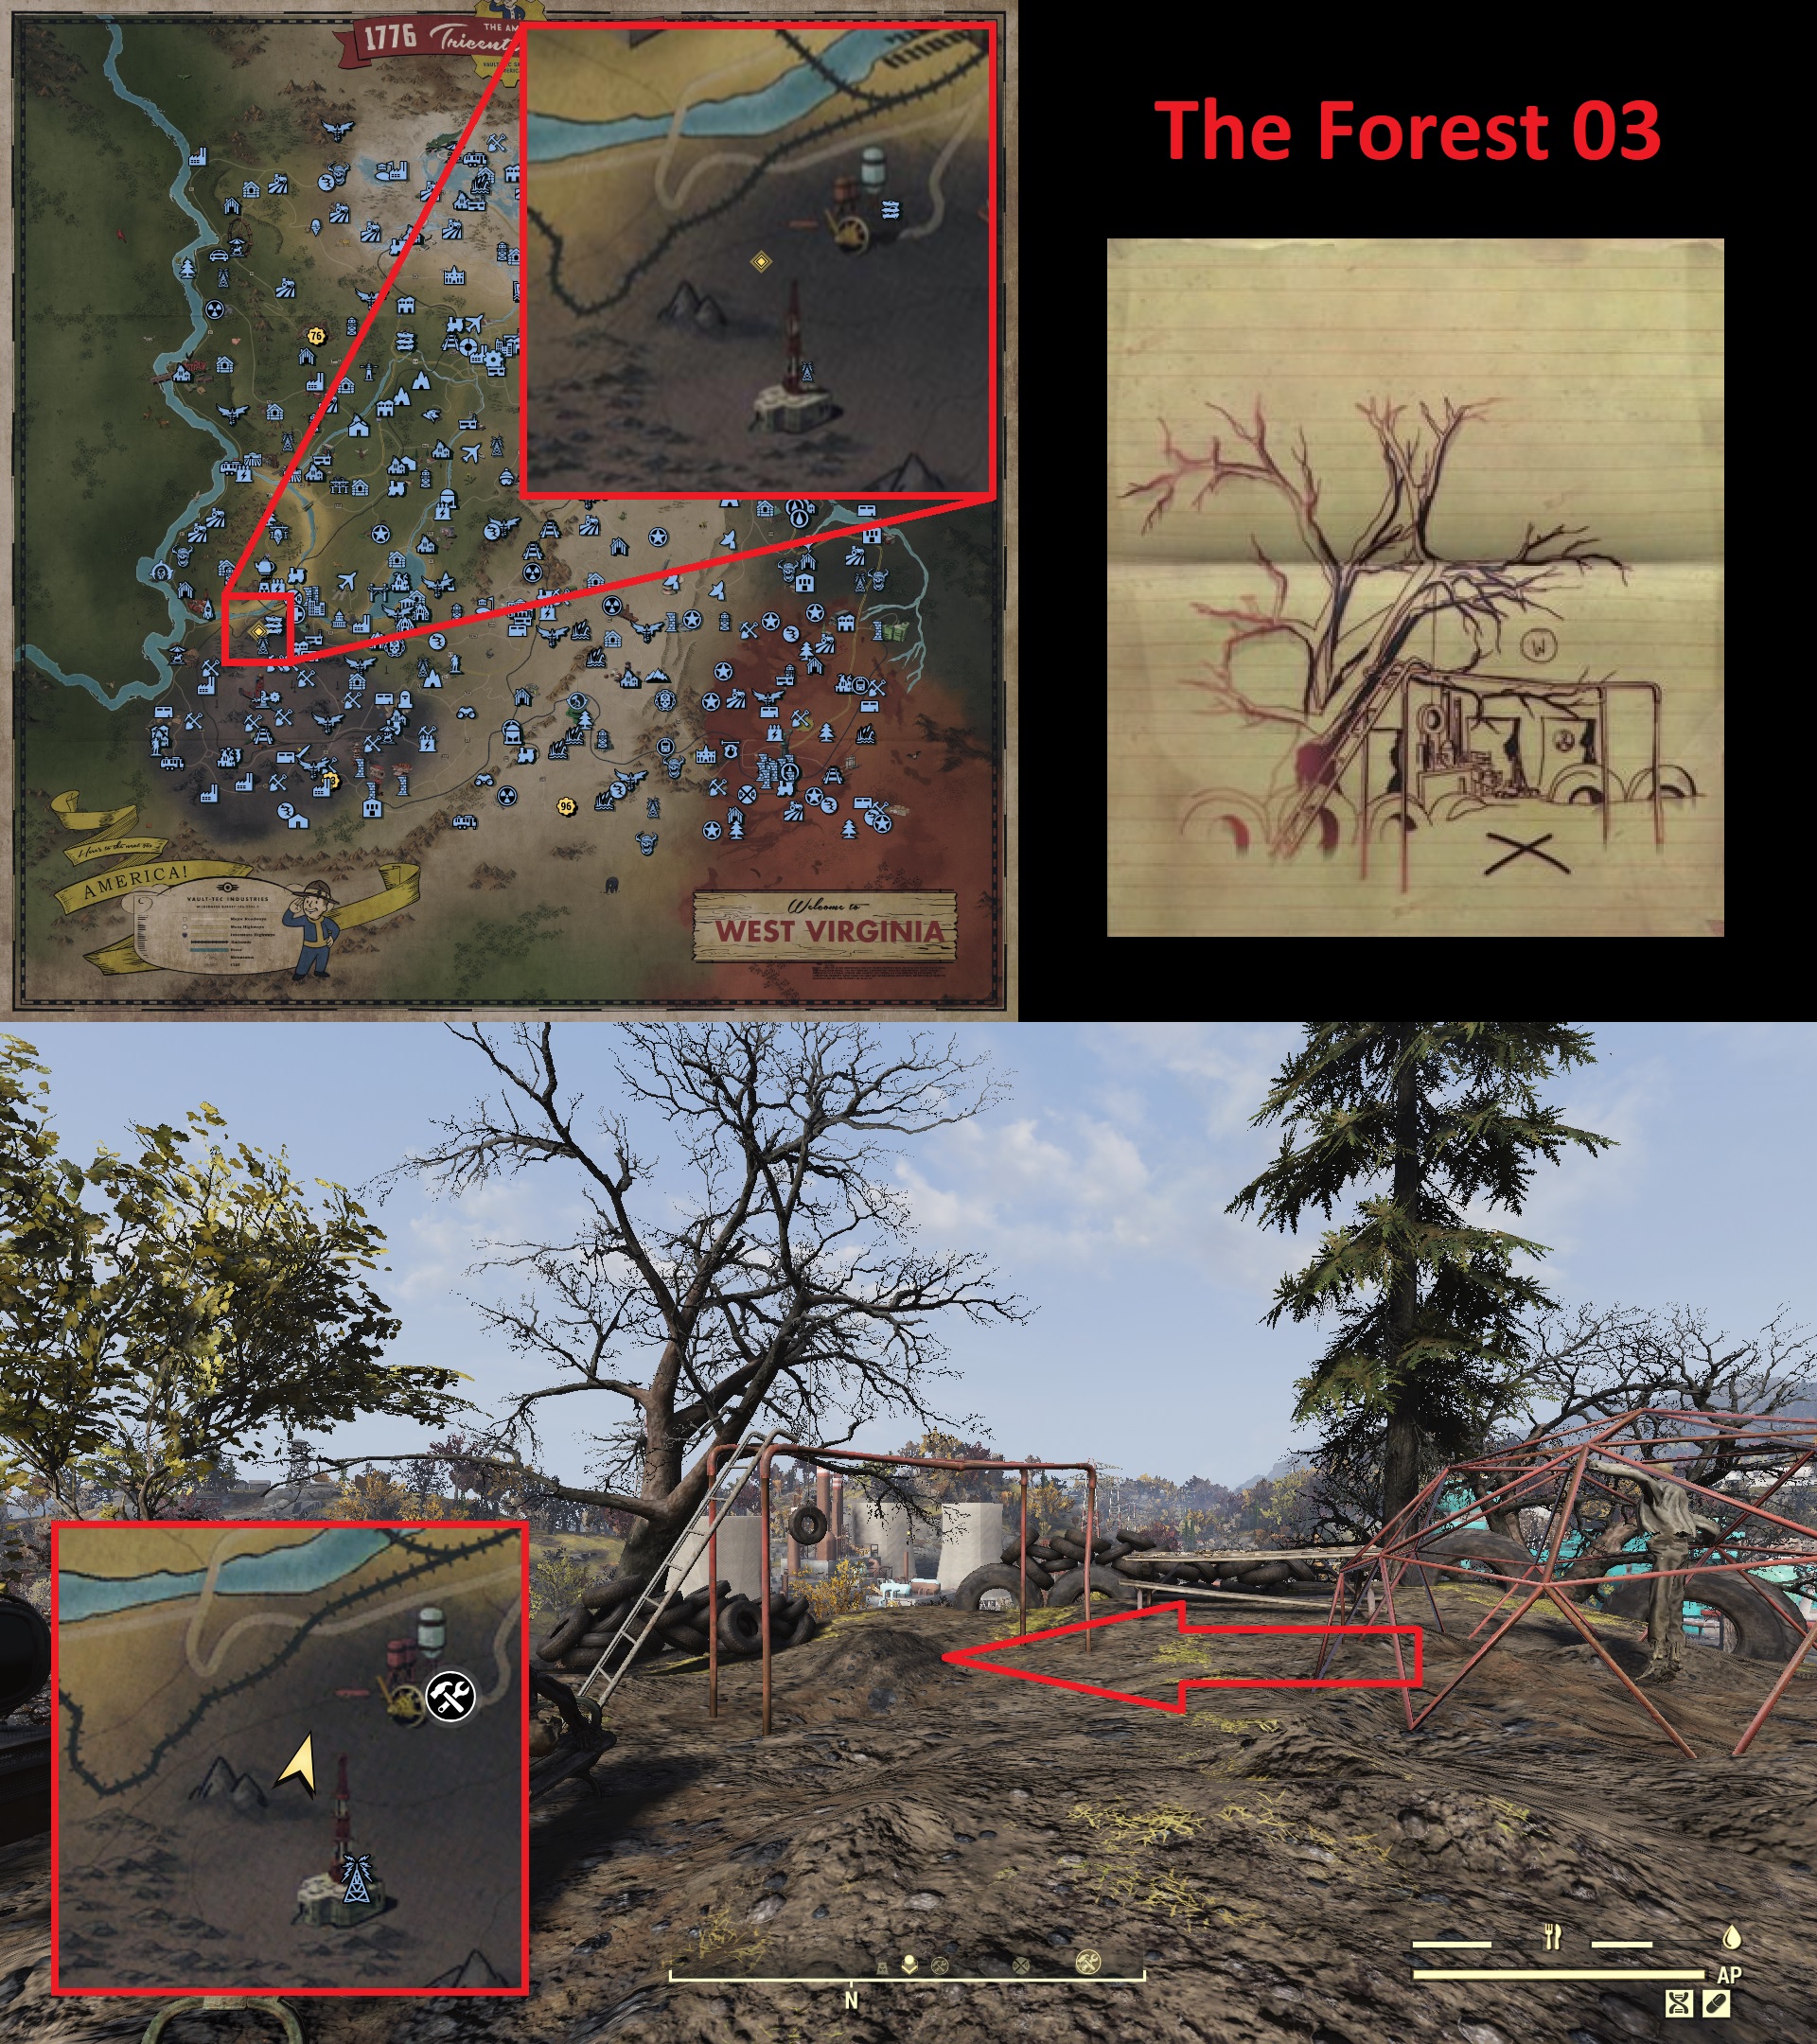 Fallout 76 Treasure Map Locations - The Forest 03 - AFECB26